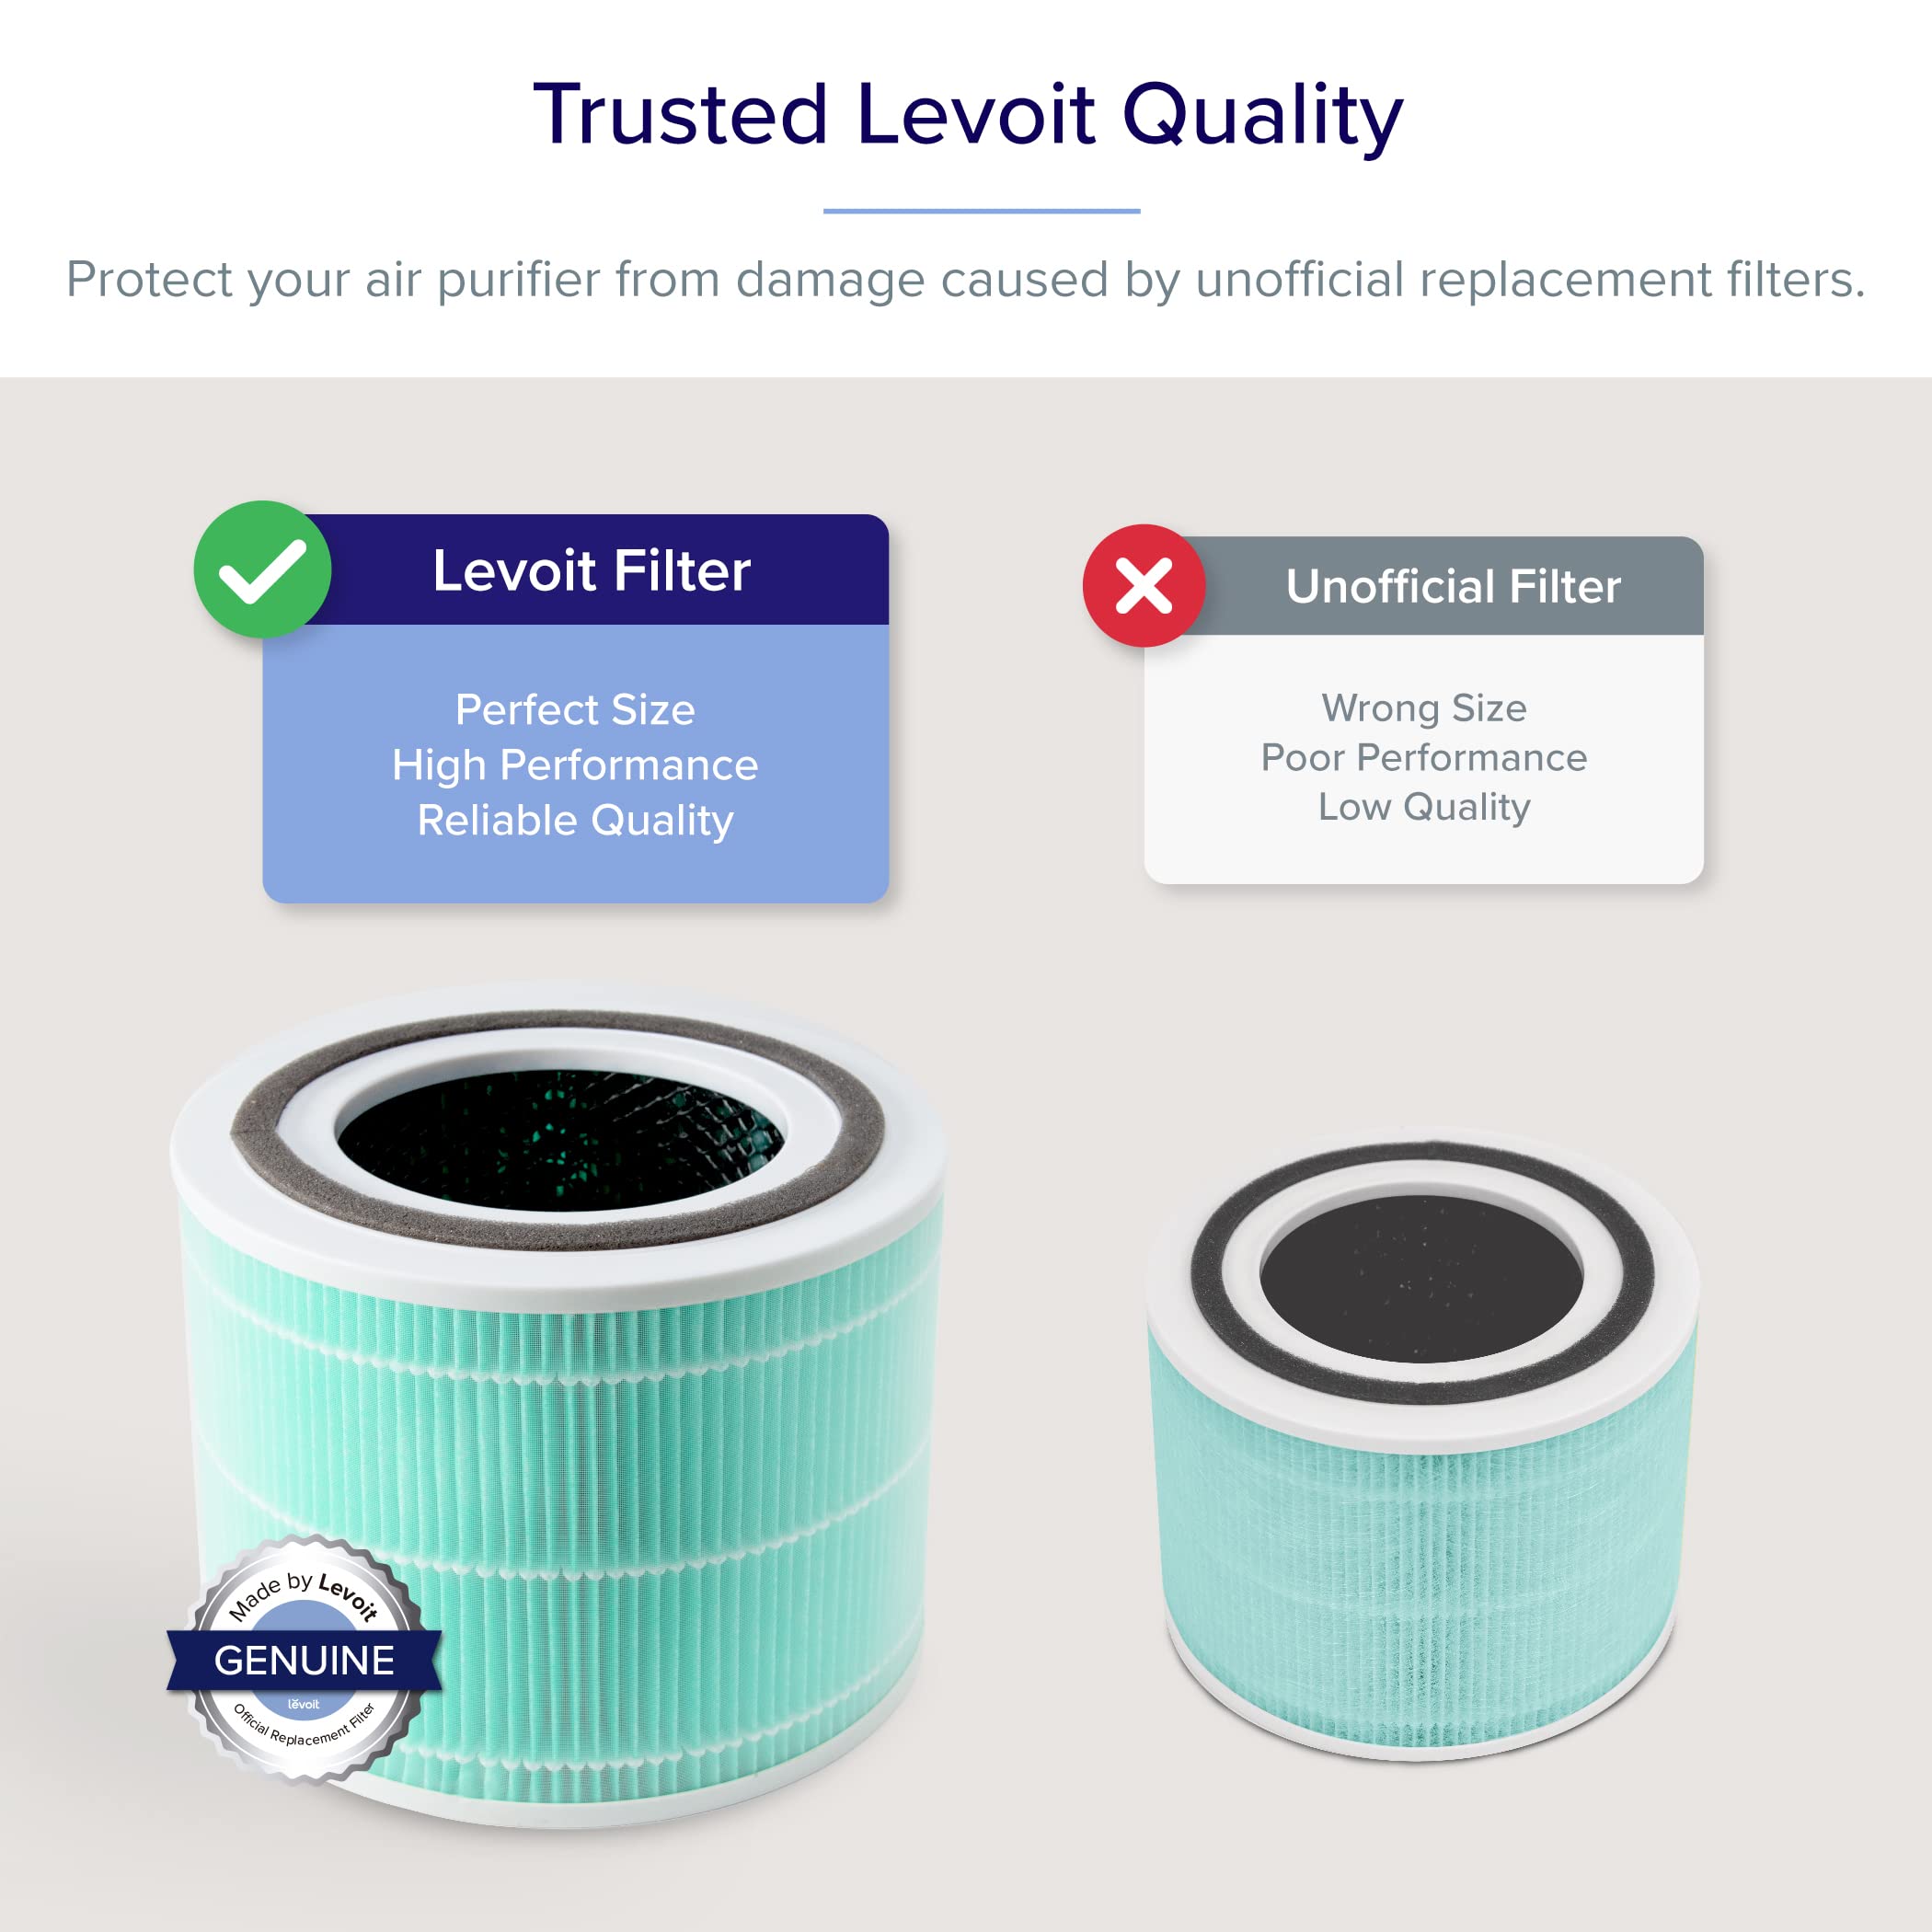 LEVOIT LV-H135 Air Purifier Replacement Filter, True HEPA and Activated Carbon Filters Set, LV-H135-RF, White & Core 300 Air Purifier Toxin Absorber Replacement Filter, 3-in-1 True HEPA, 1 Pack, Green